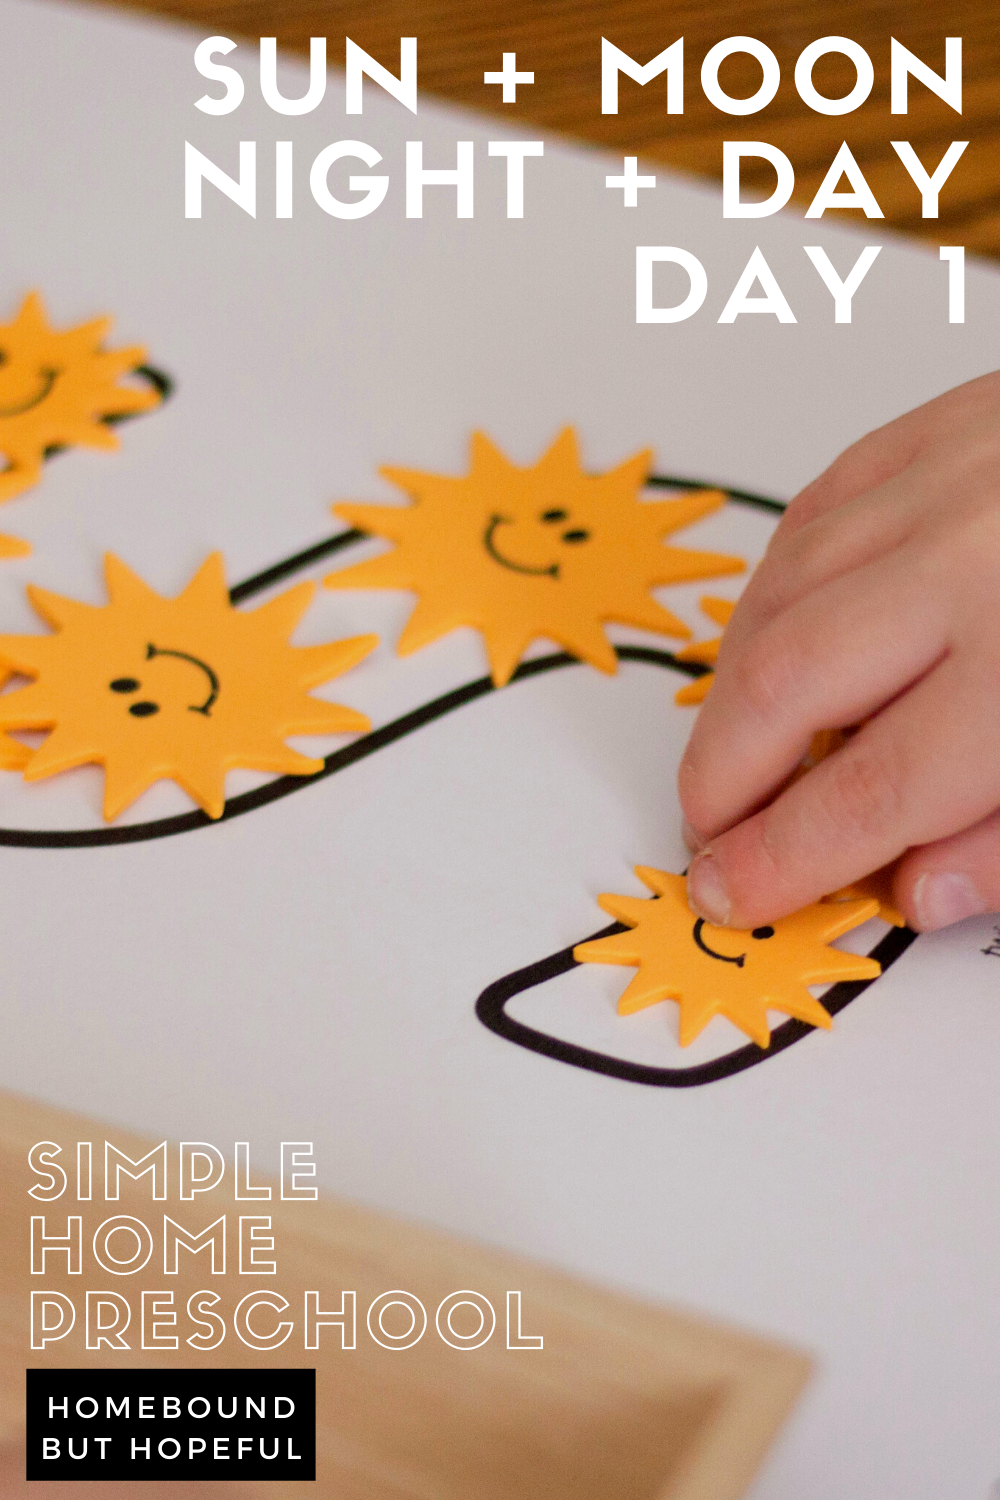 Day 1 of our easy home preschool week was spent learning about the sun. Check out the resources I gathered to engage my son in science education. #preschool #preschooler #preschoolideas #preschoolactivities